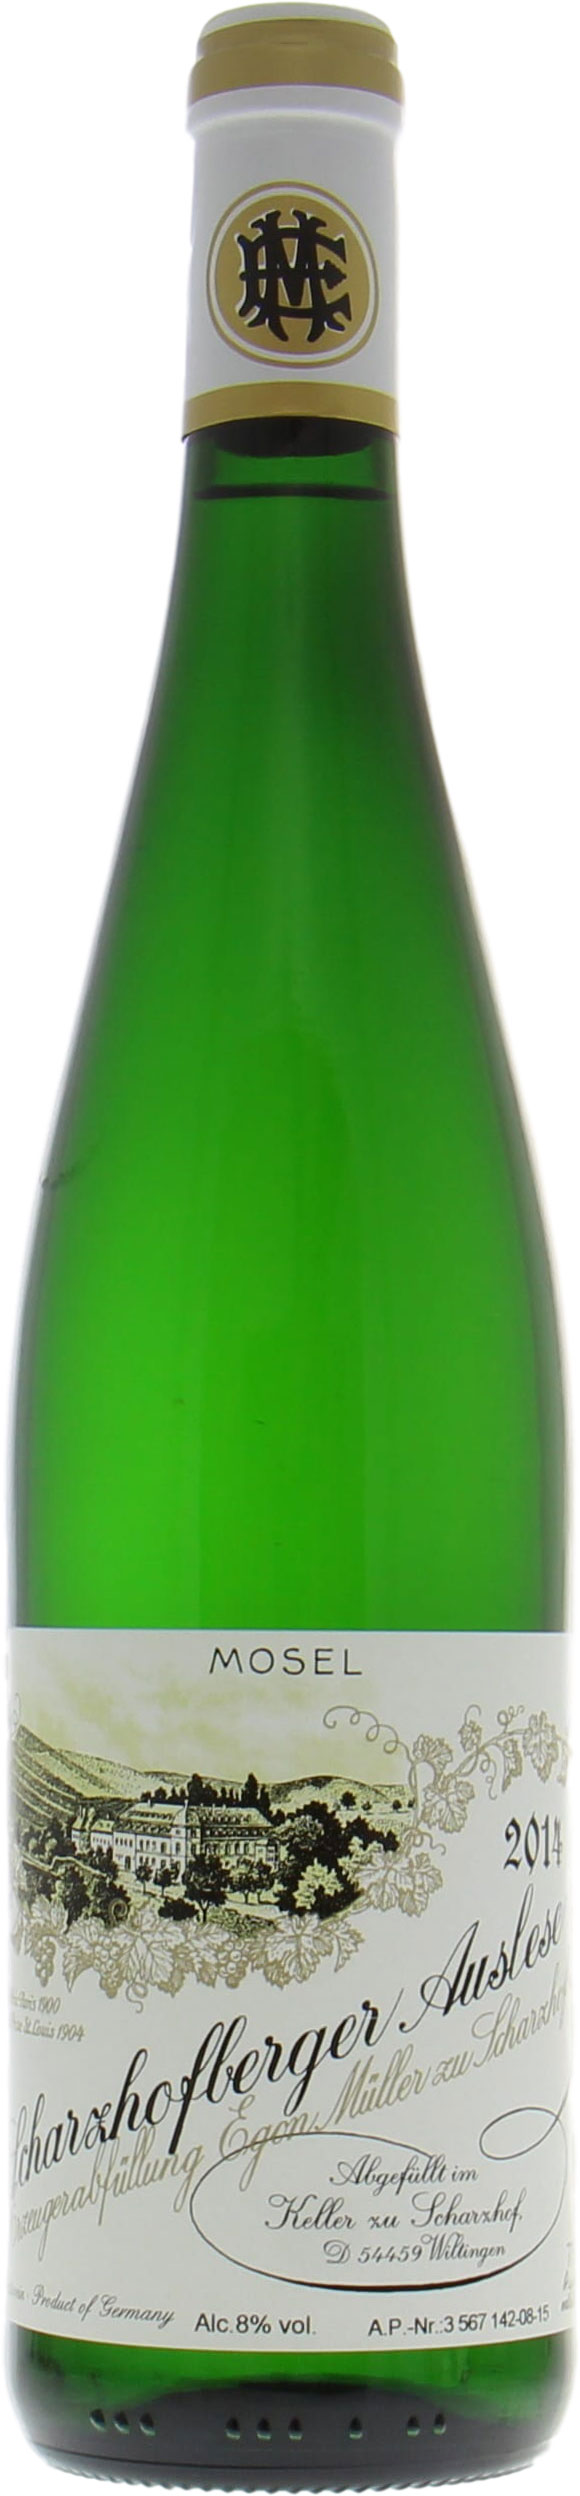 Egon Muller - Scharzhofberger Riesling Auslese 2014 Perfect